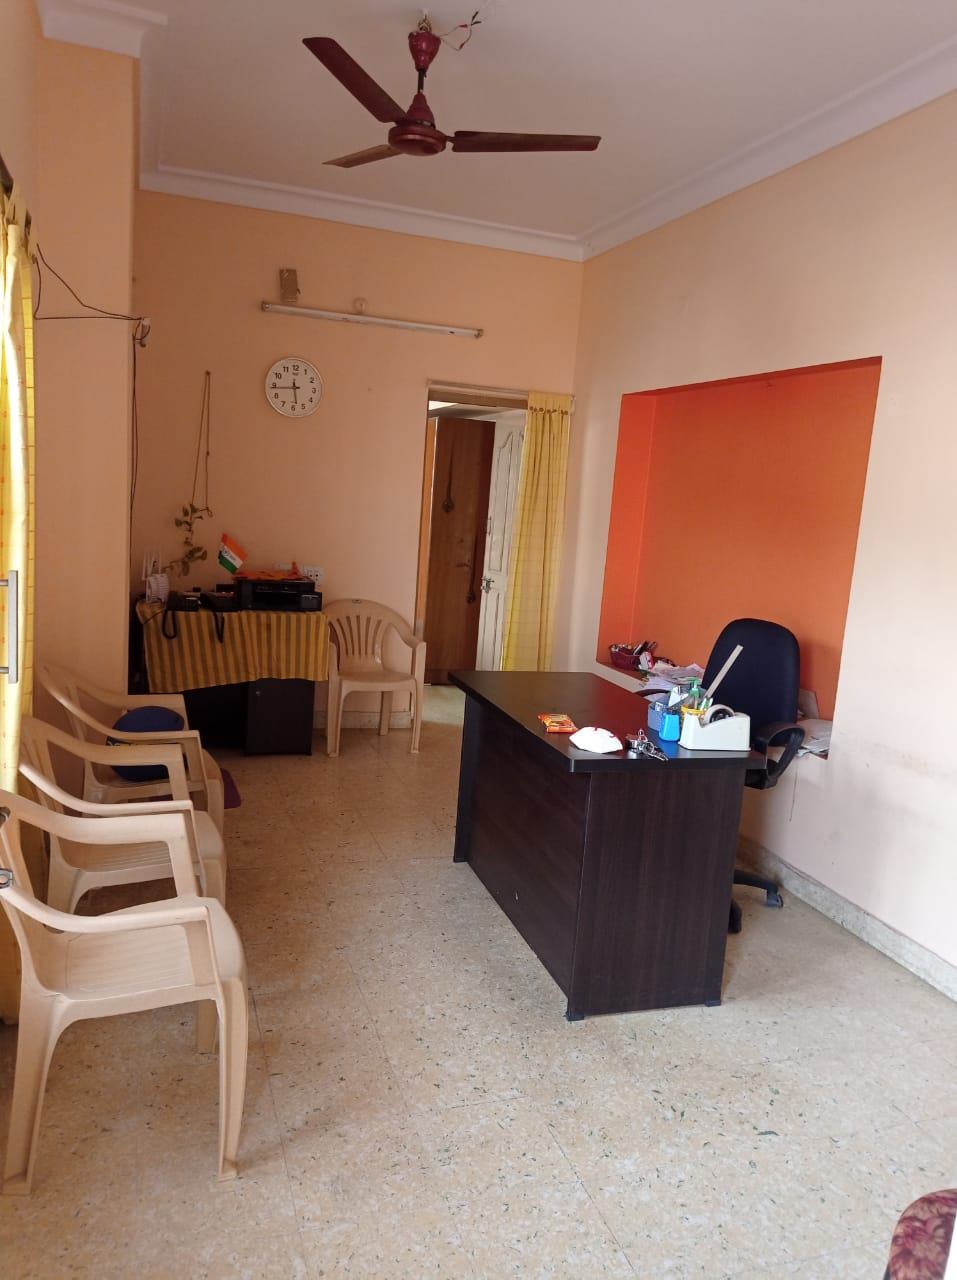 Rent Office/ Shop, 600 sq ft carpet area, Semi Furnished for rent @Arekere mico layout Bannerghatta road 